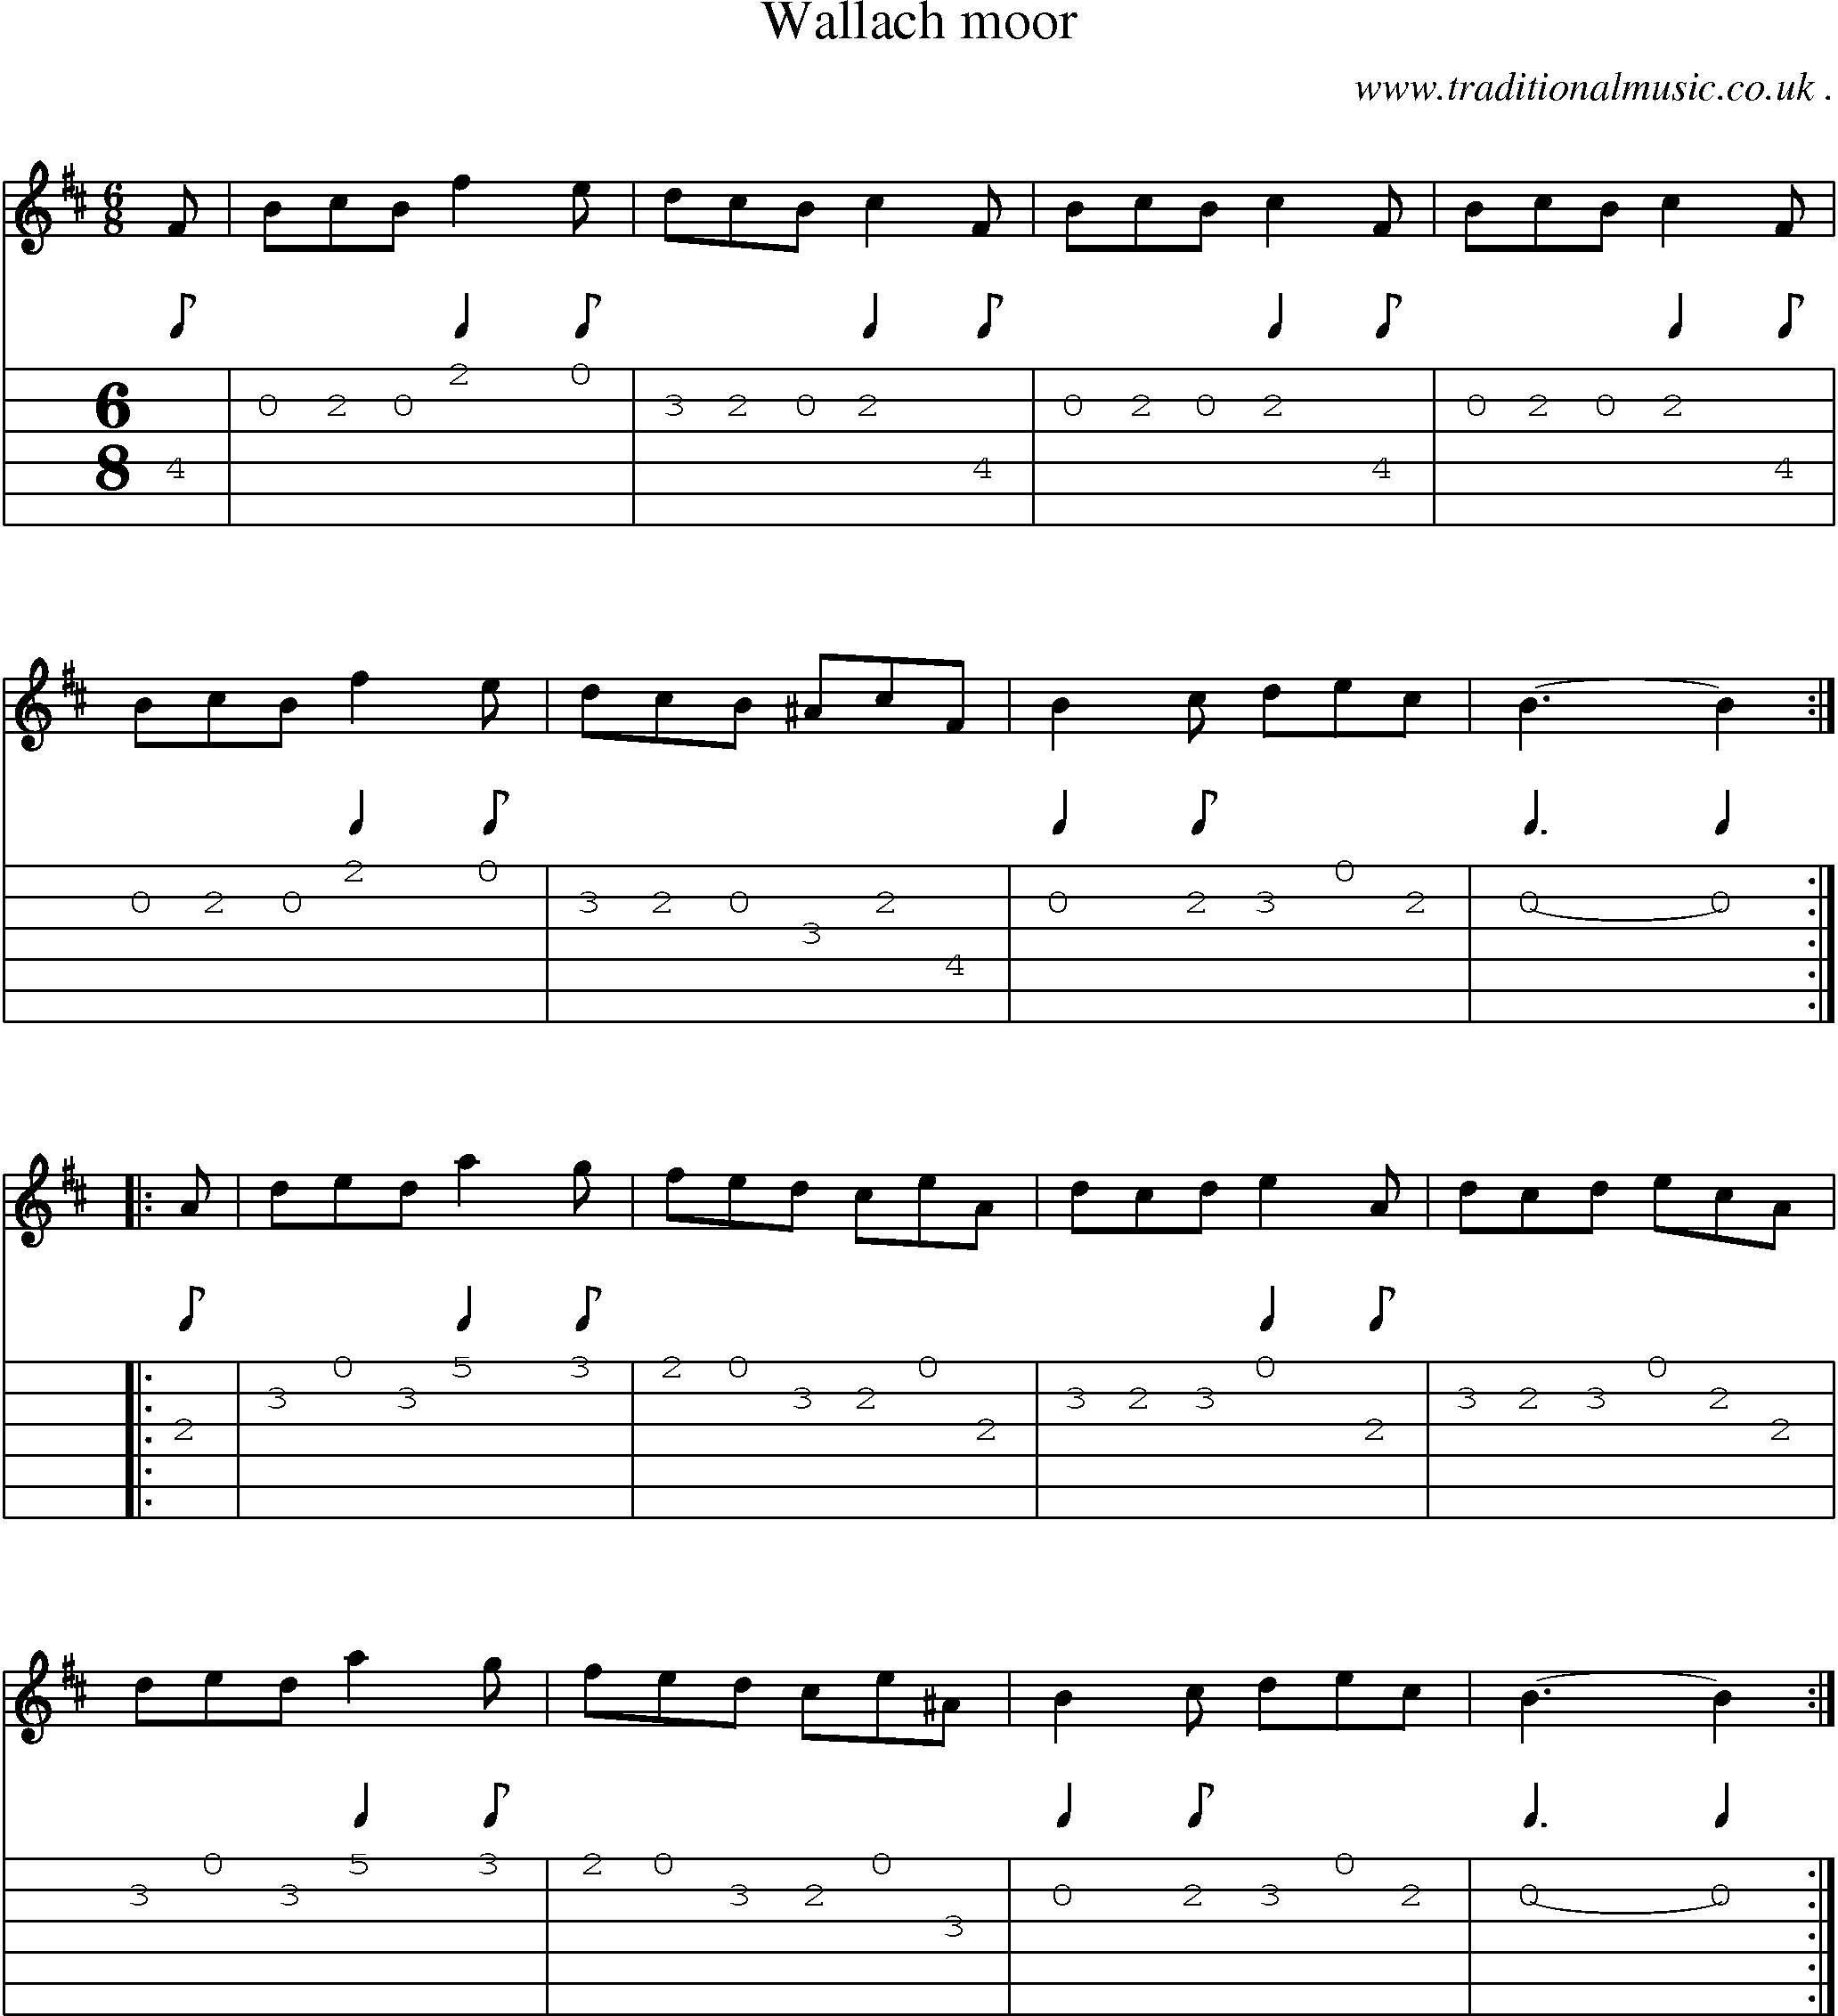 Sheet-Music and Guitar Tabs for Wallach Moor